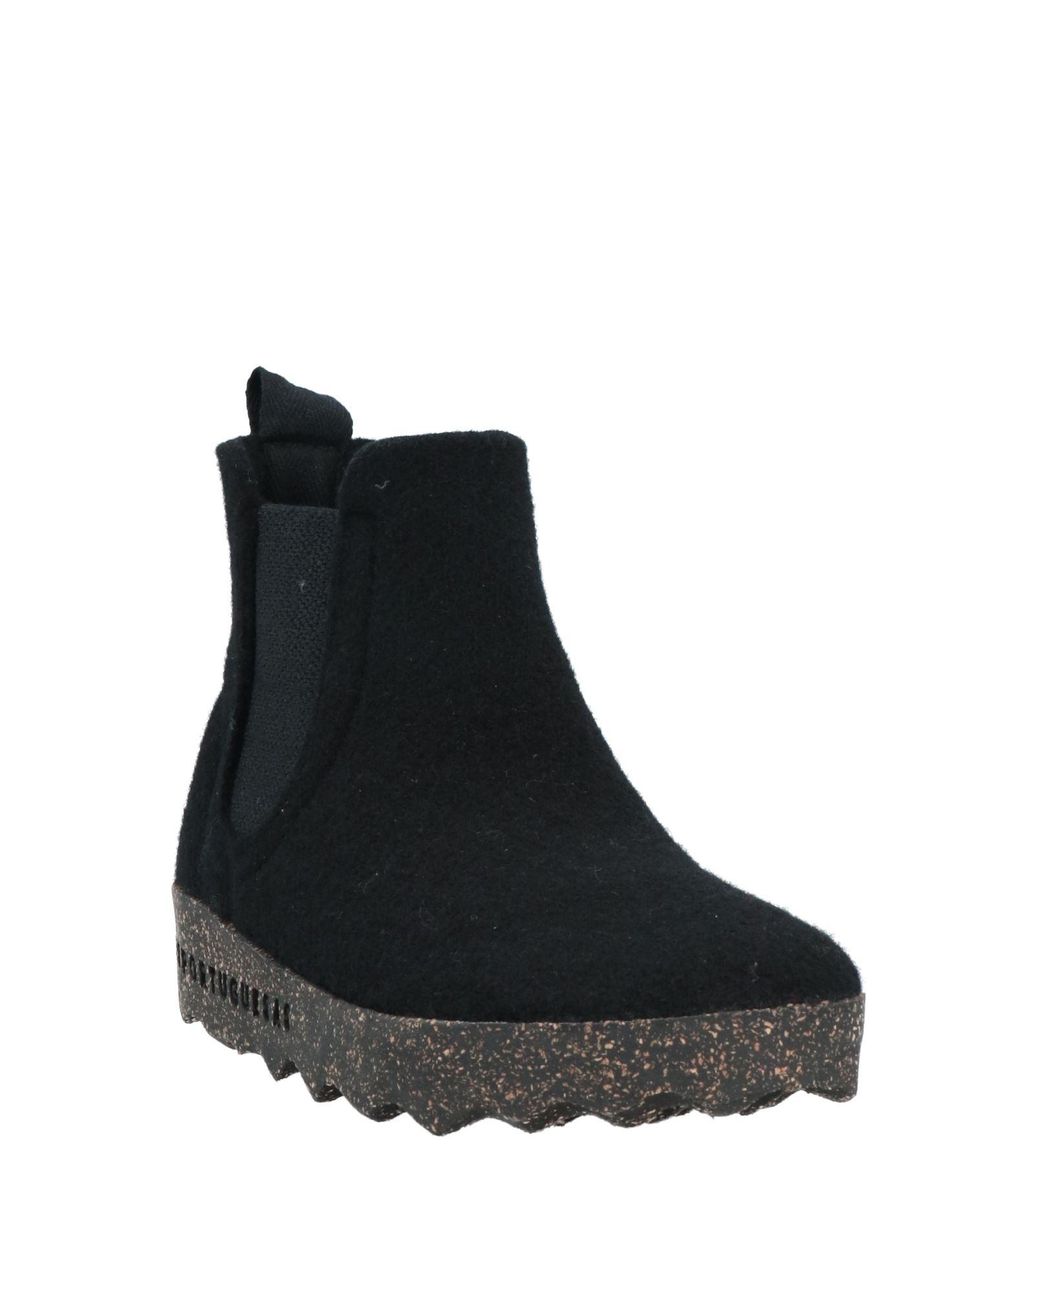 ASPORTUGUESAS Ankle Boots in Black | Lyst